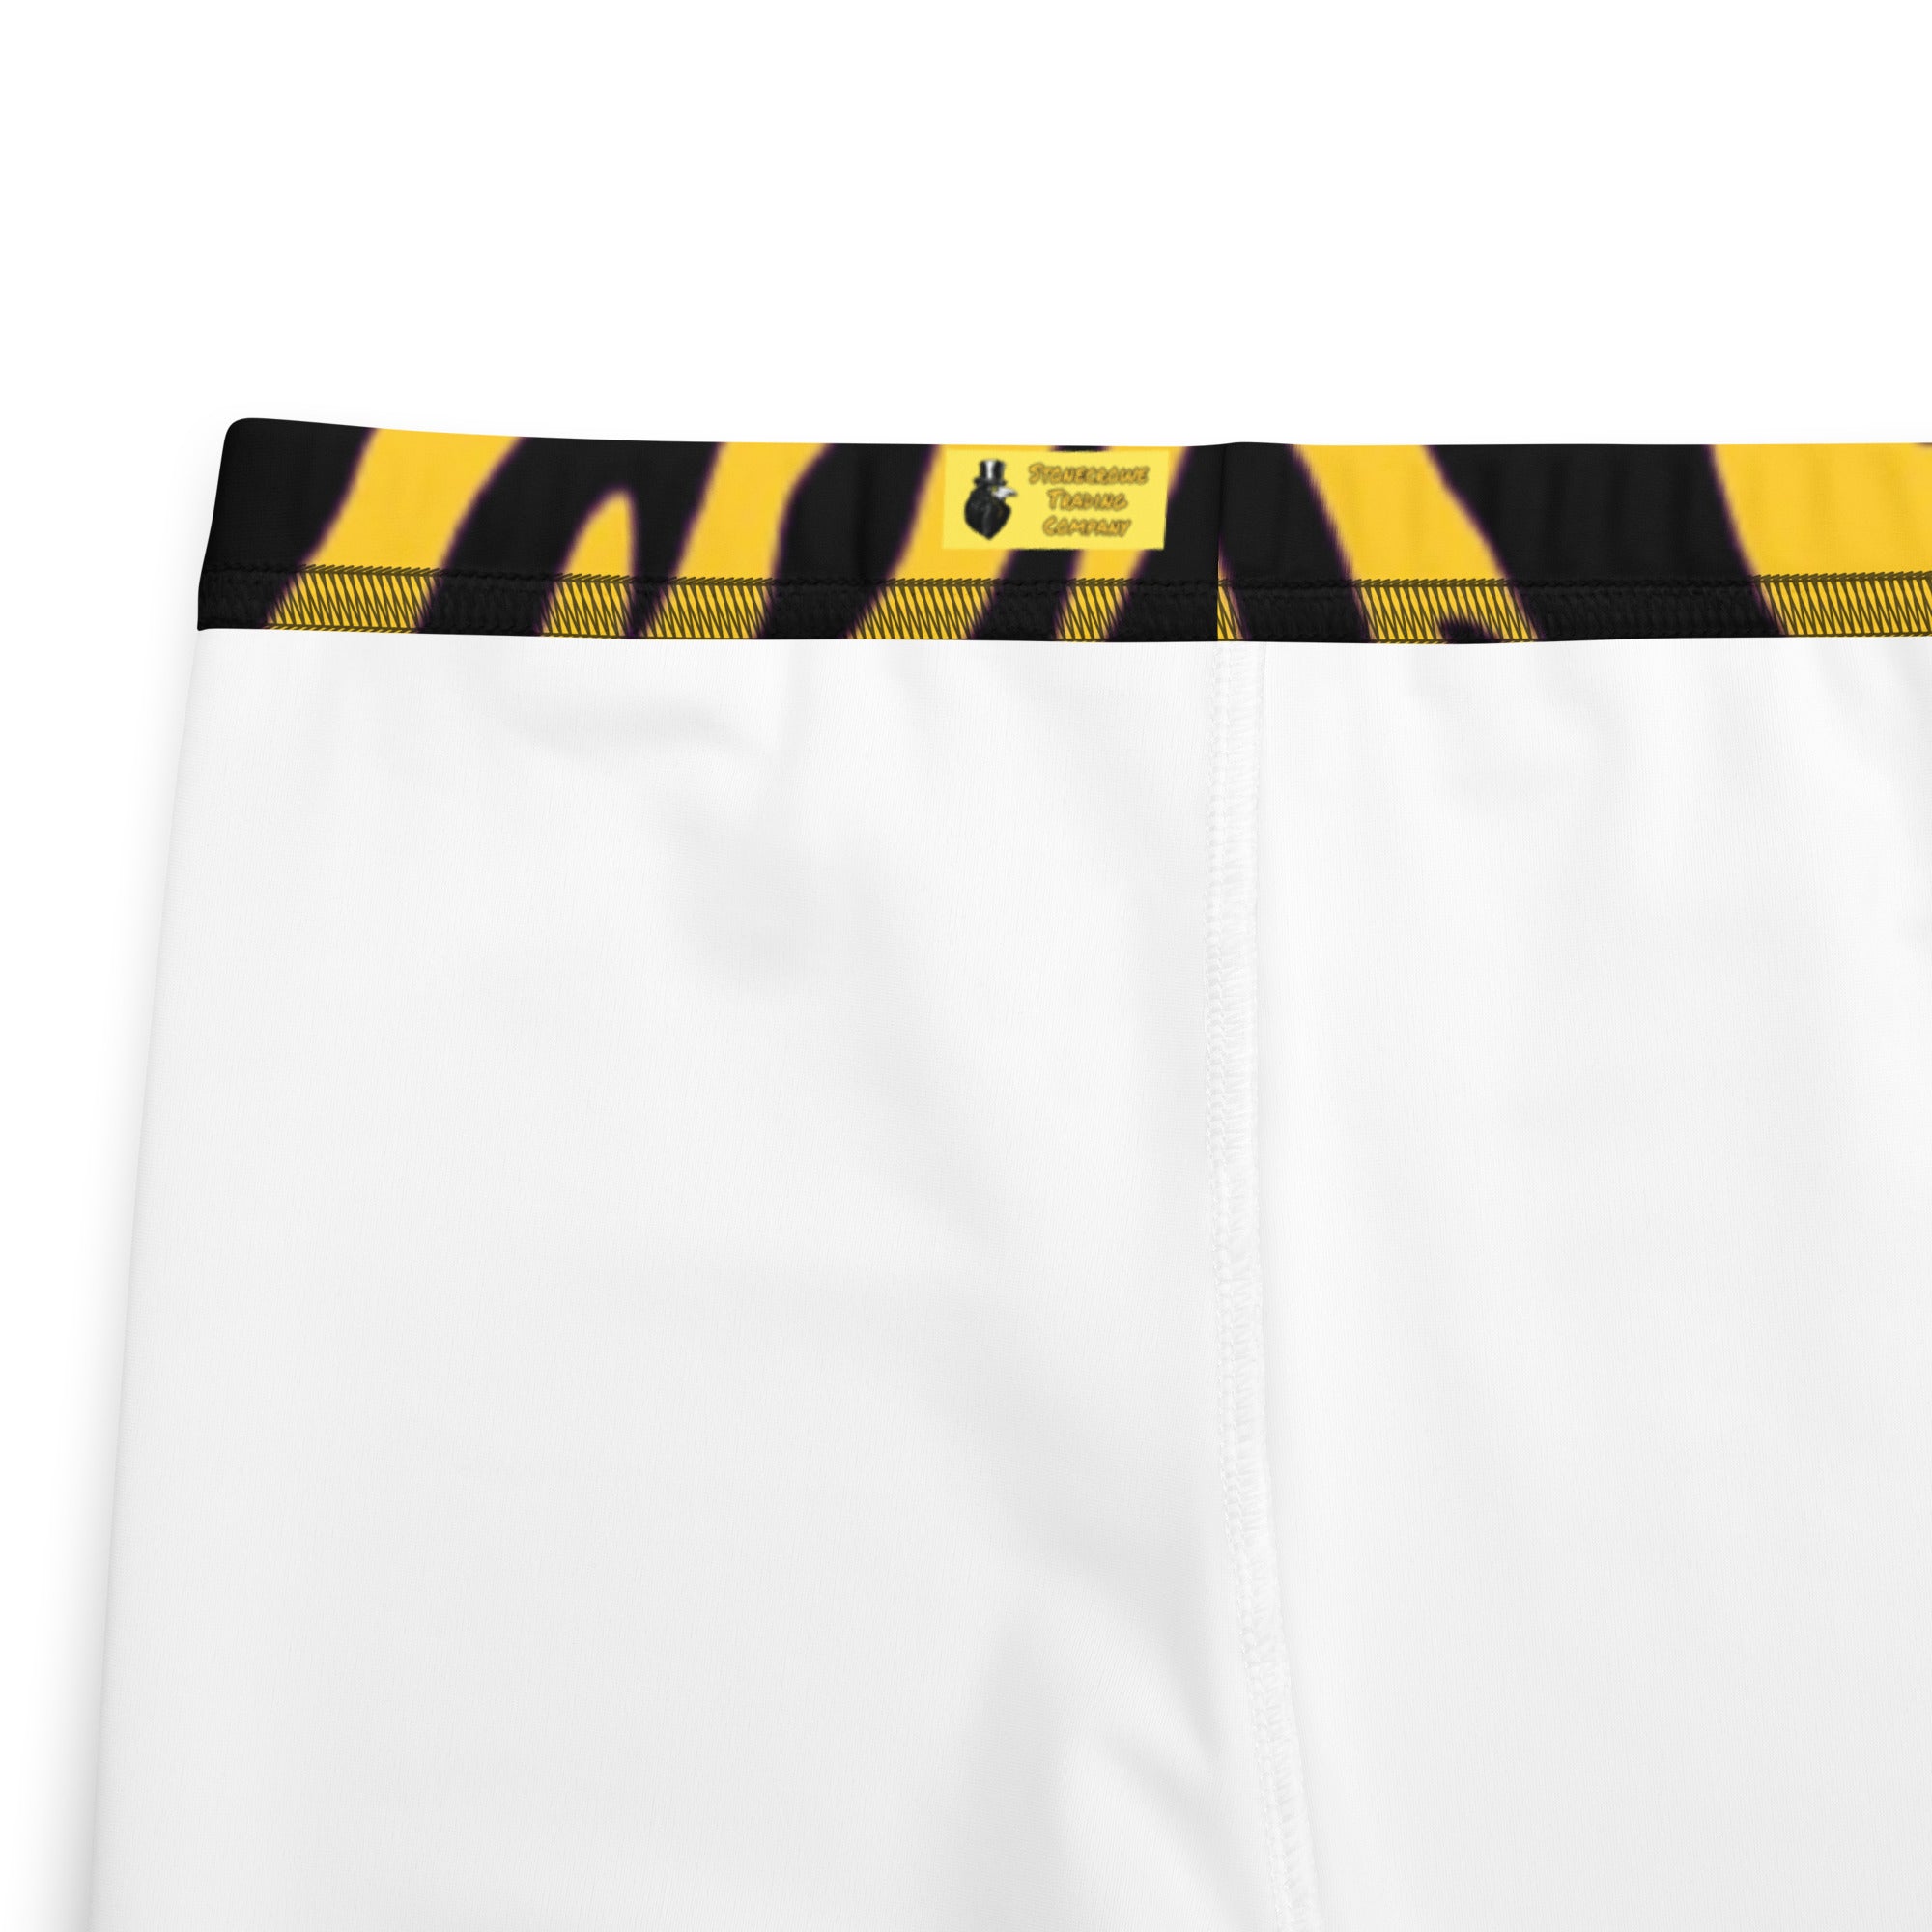 Black and Gold Tiger Stripes Youth Leggings